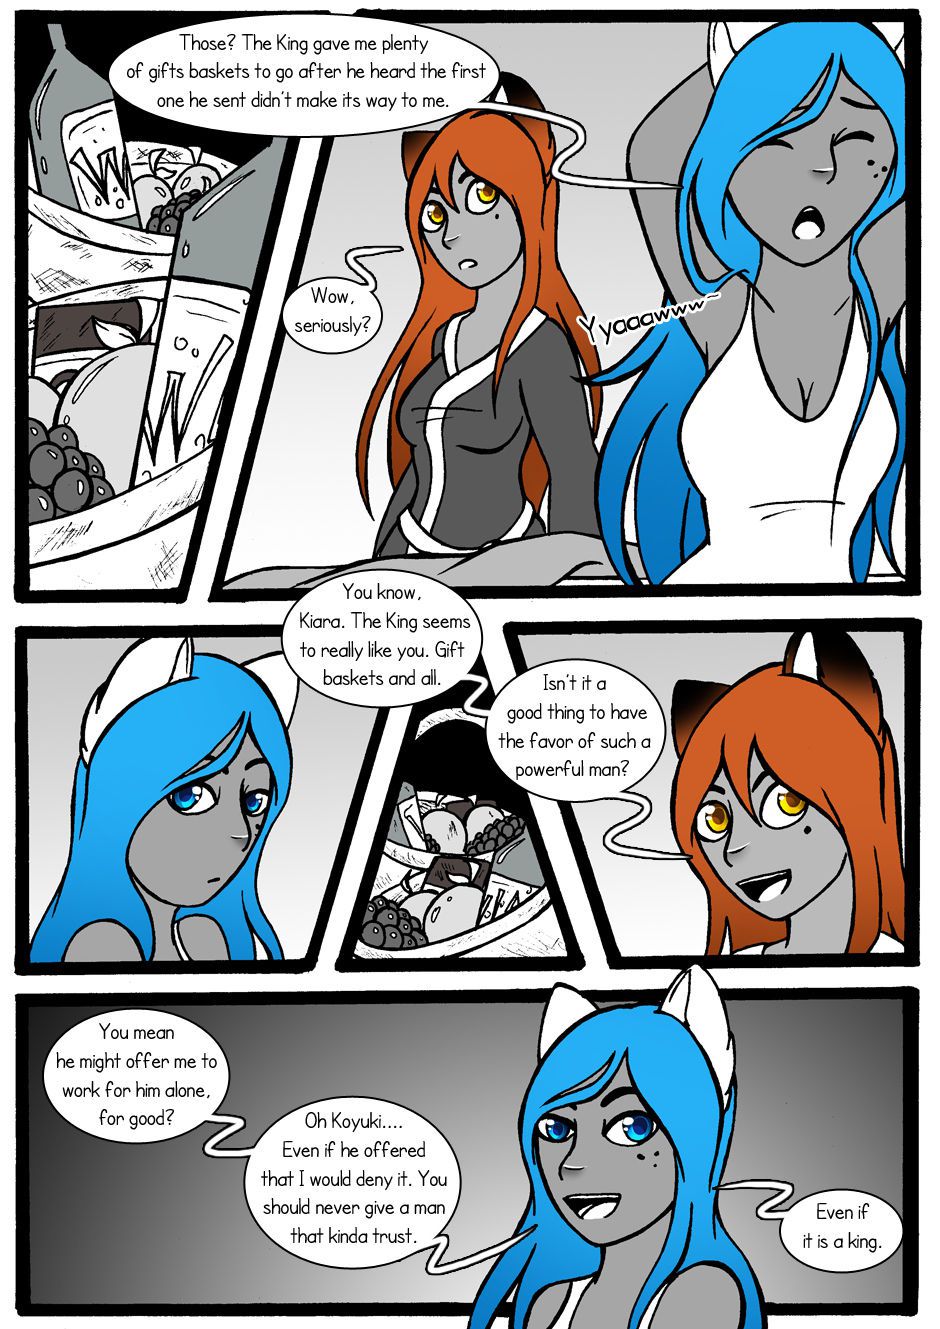 [Jeny-jen94] Between Kings and Queens [Ongoing] 68